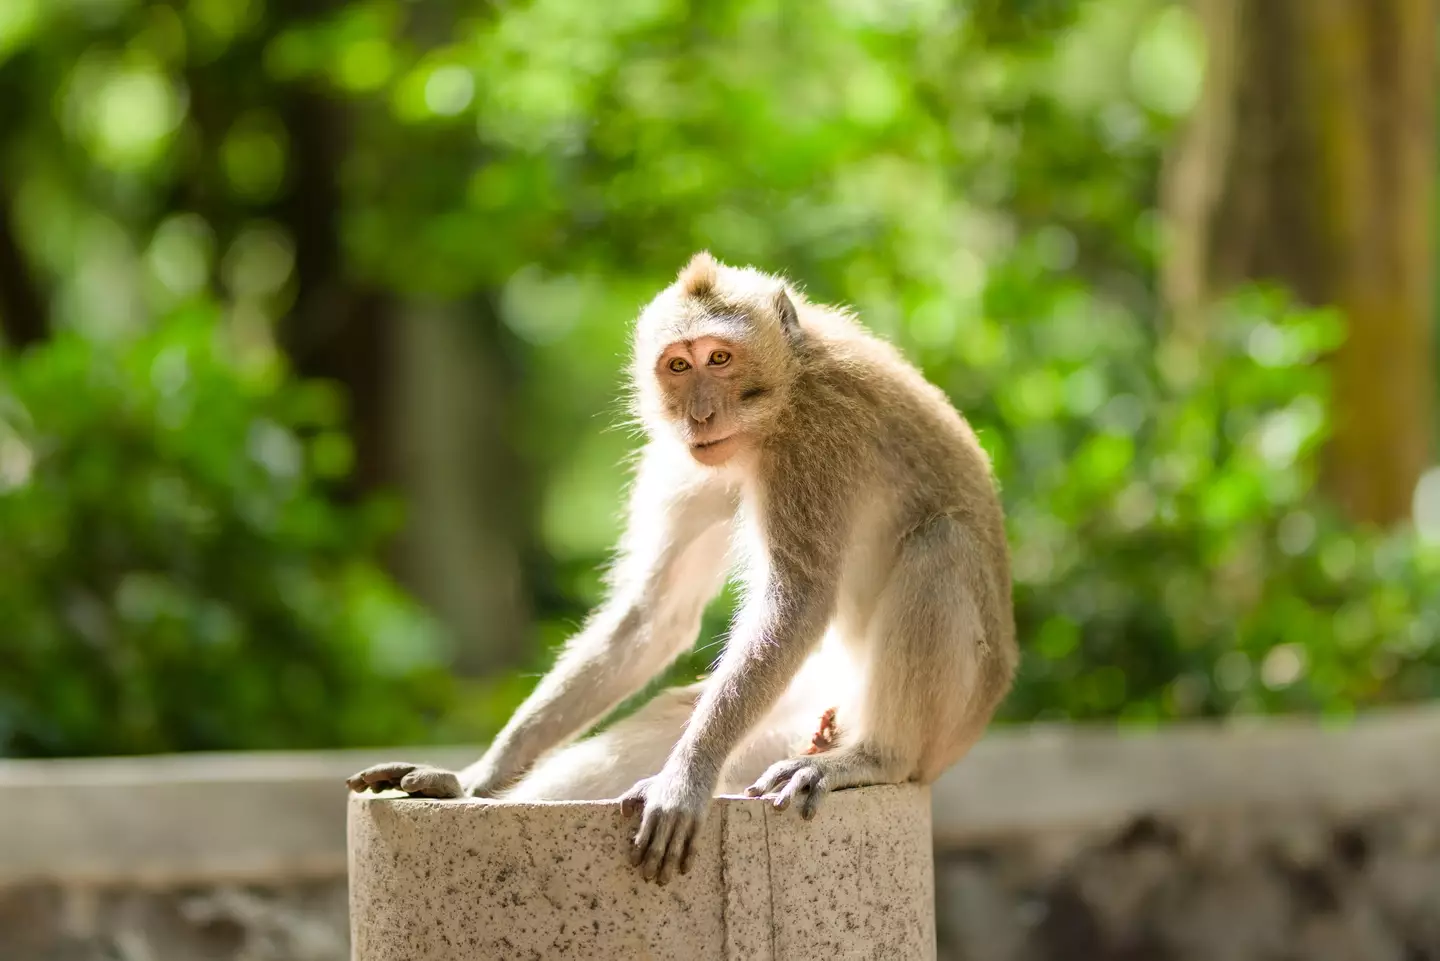 23 Macaque monkeys are reportedly part of the experiment.